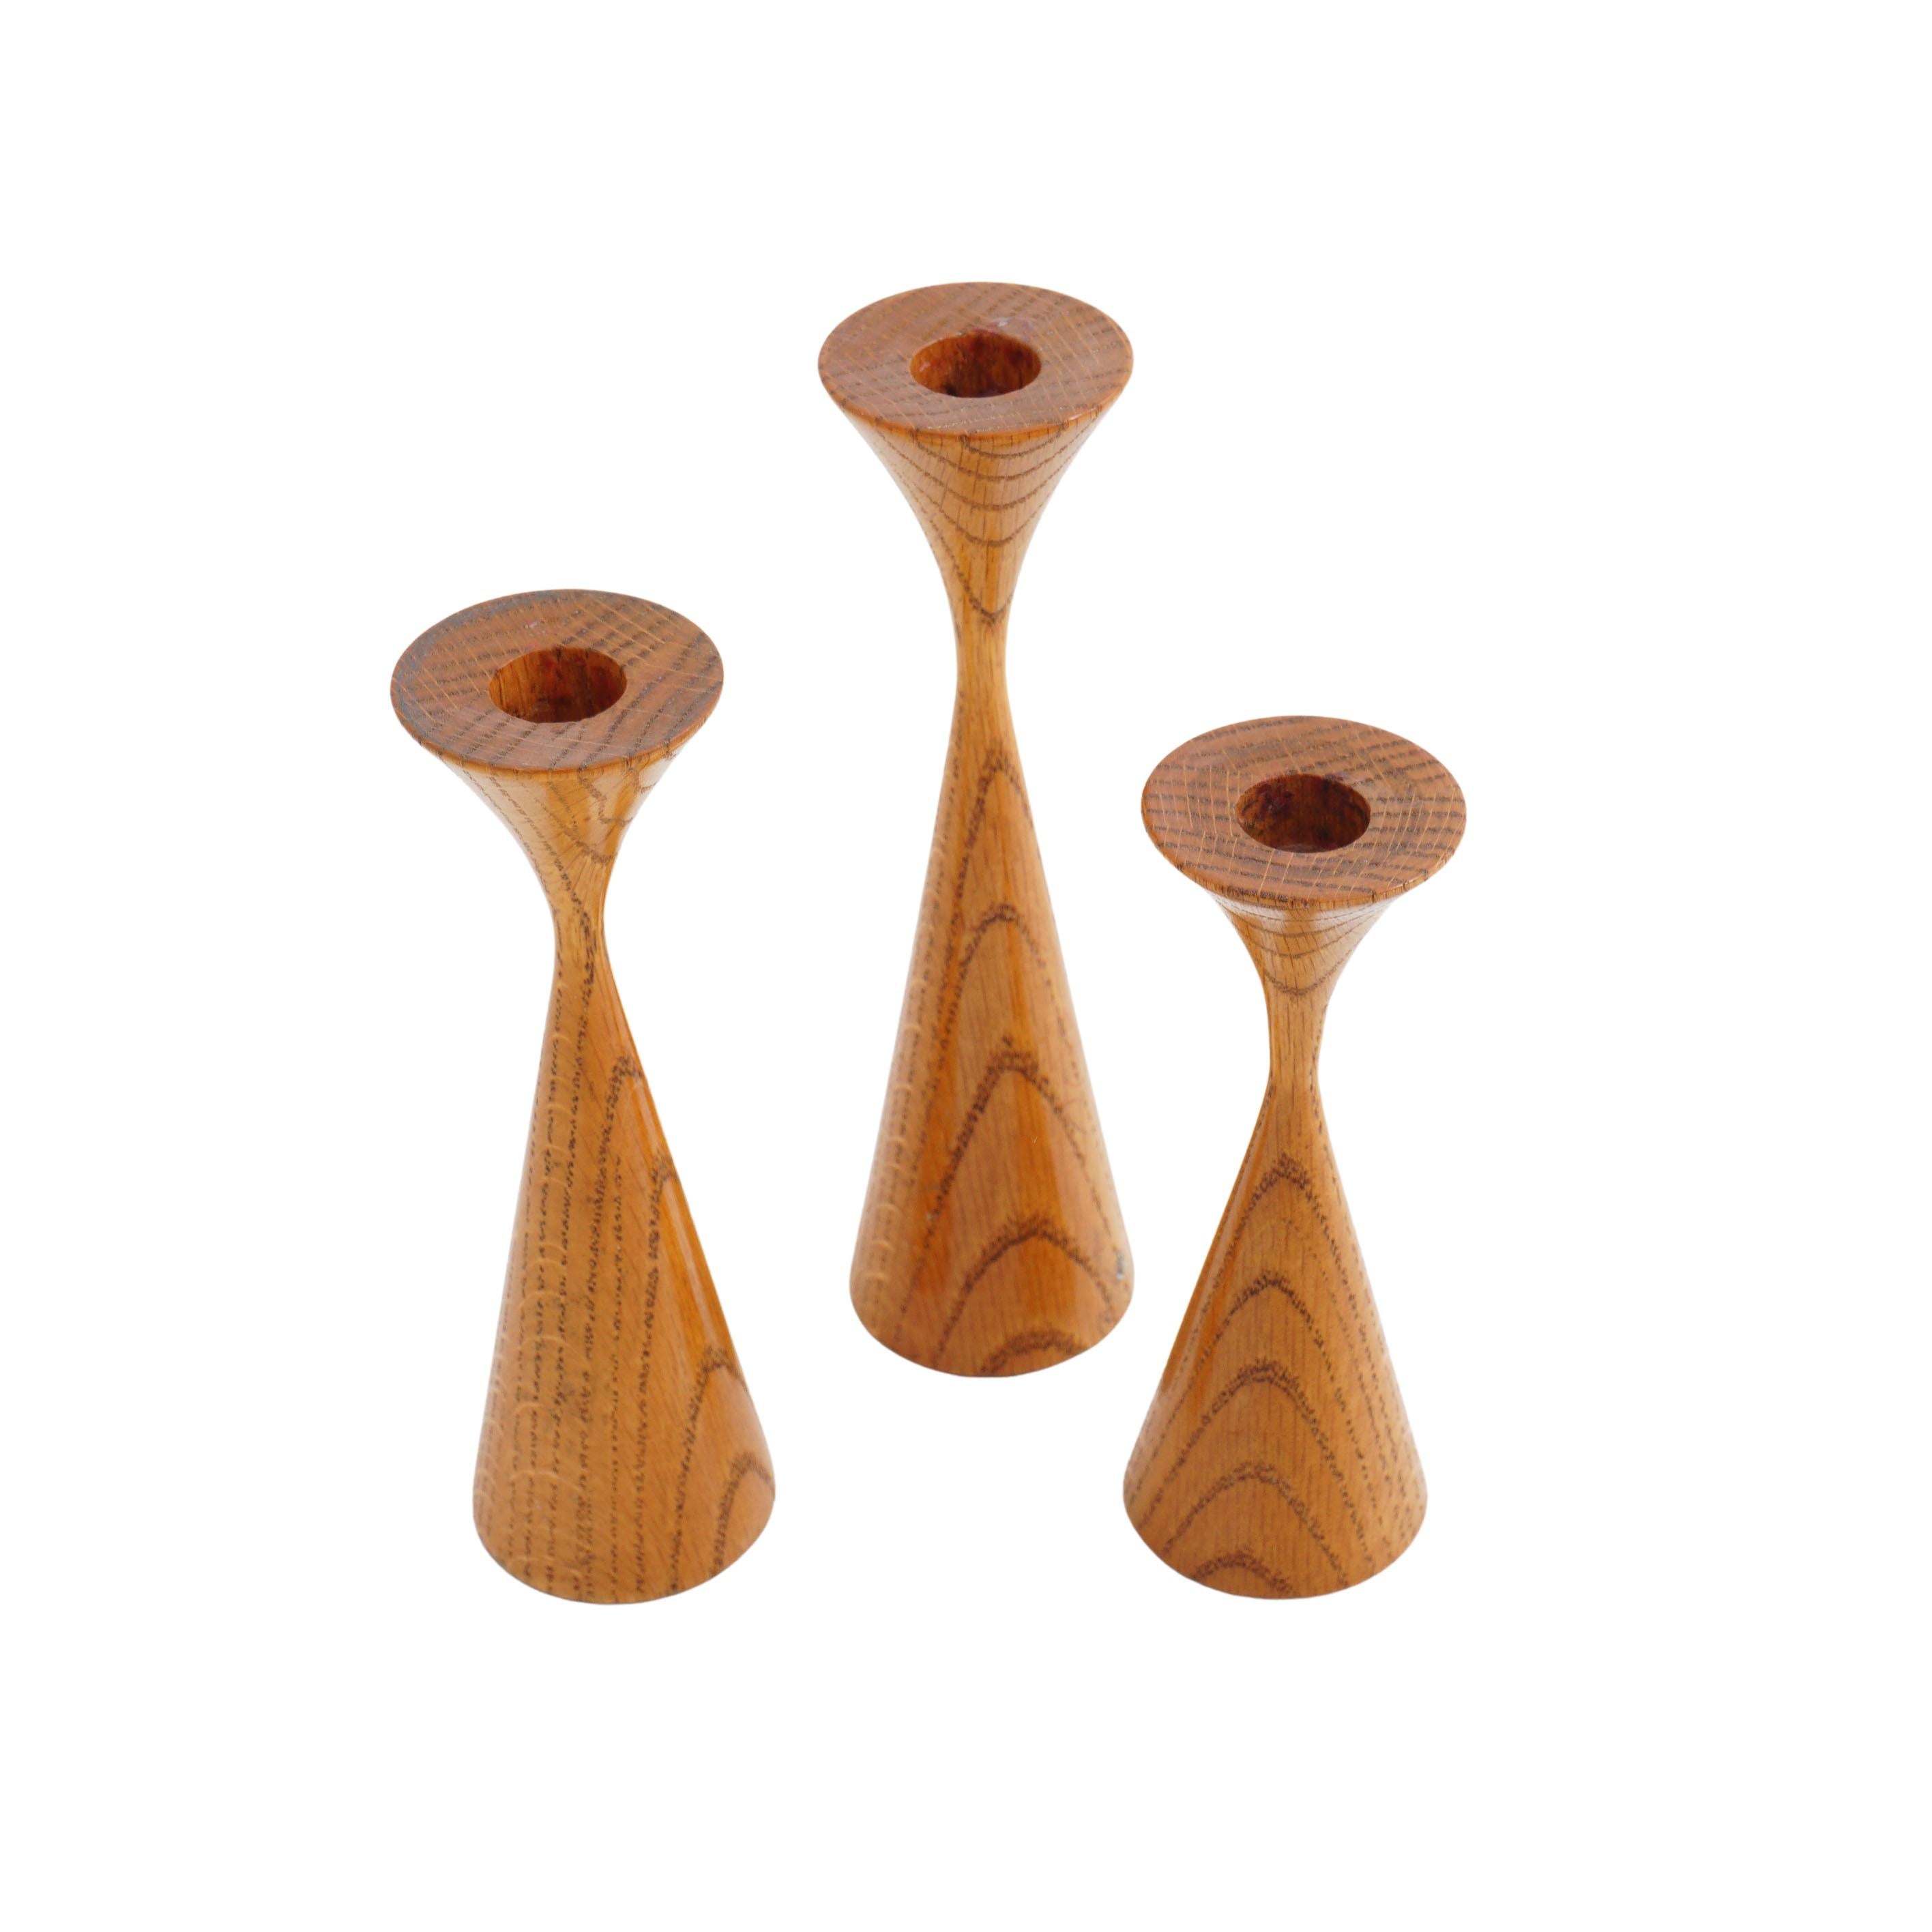 Scandinavian Modern Set of Candle Holders by Rude Osolnik, 1960s For Sale